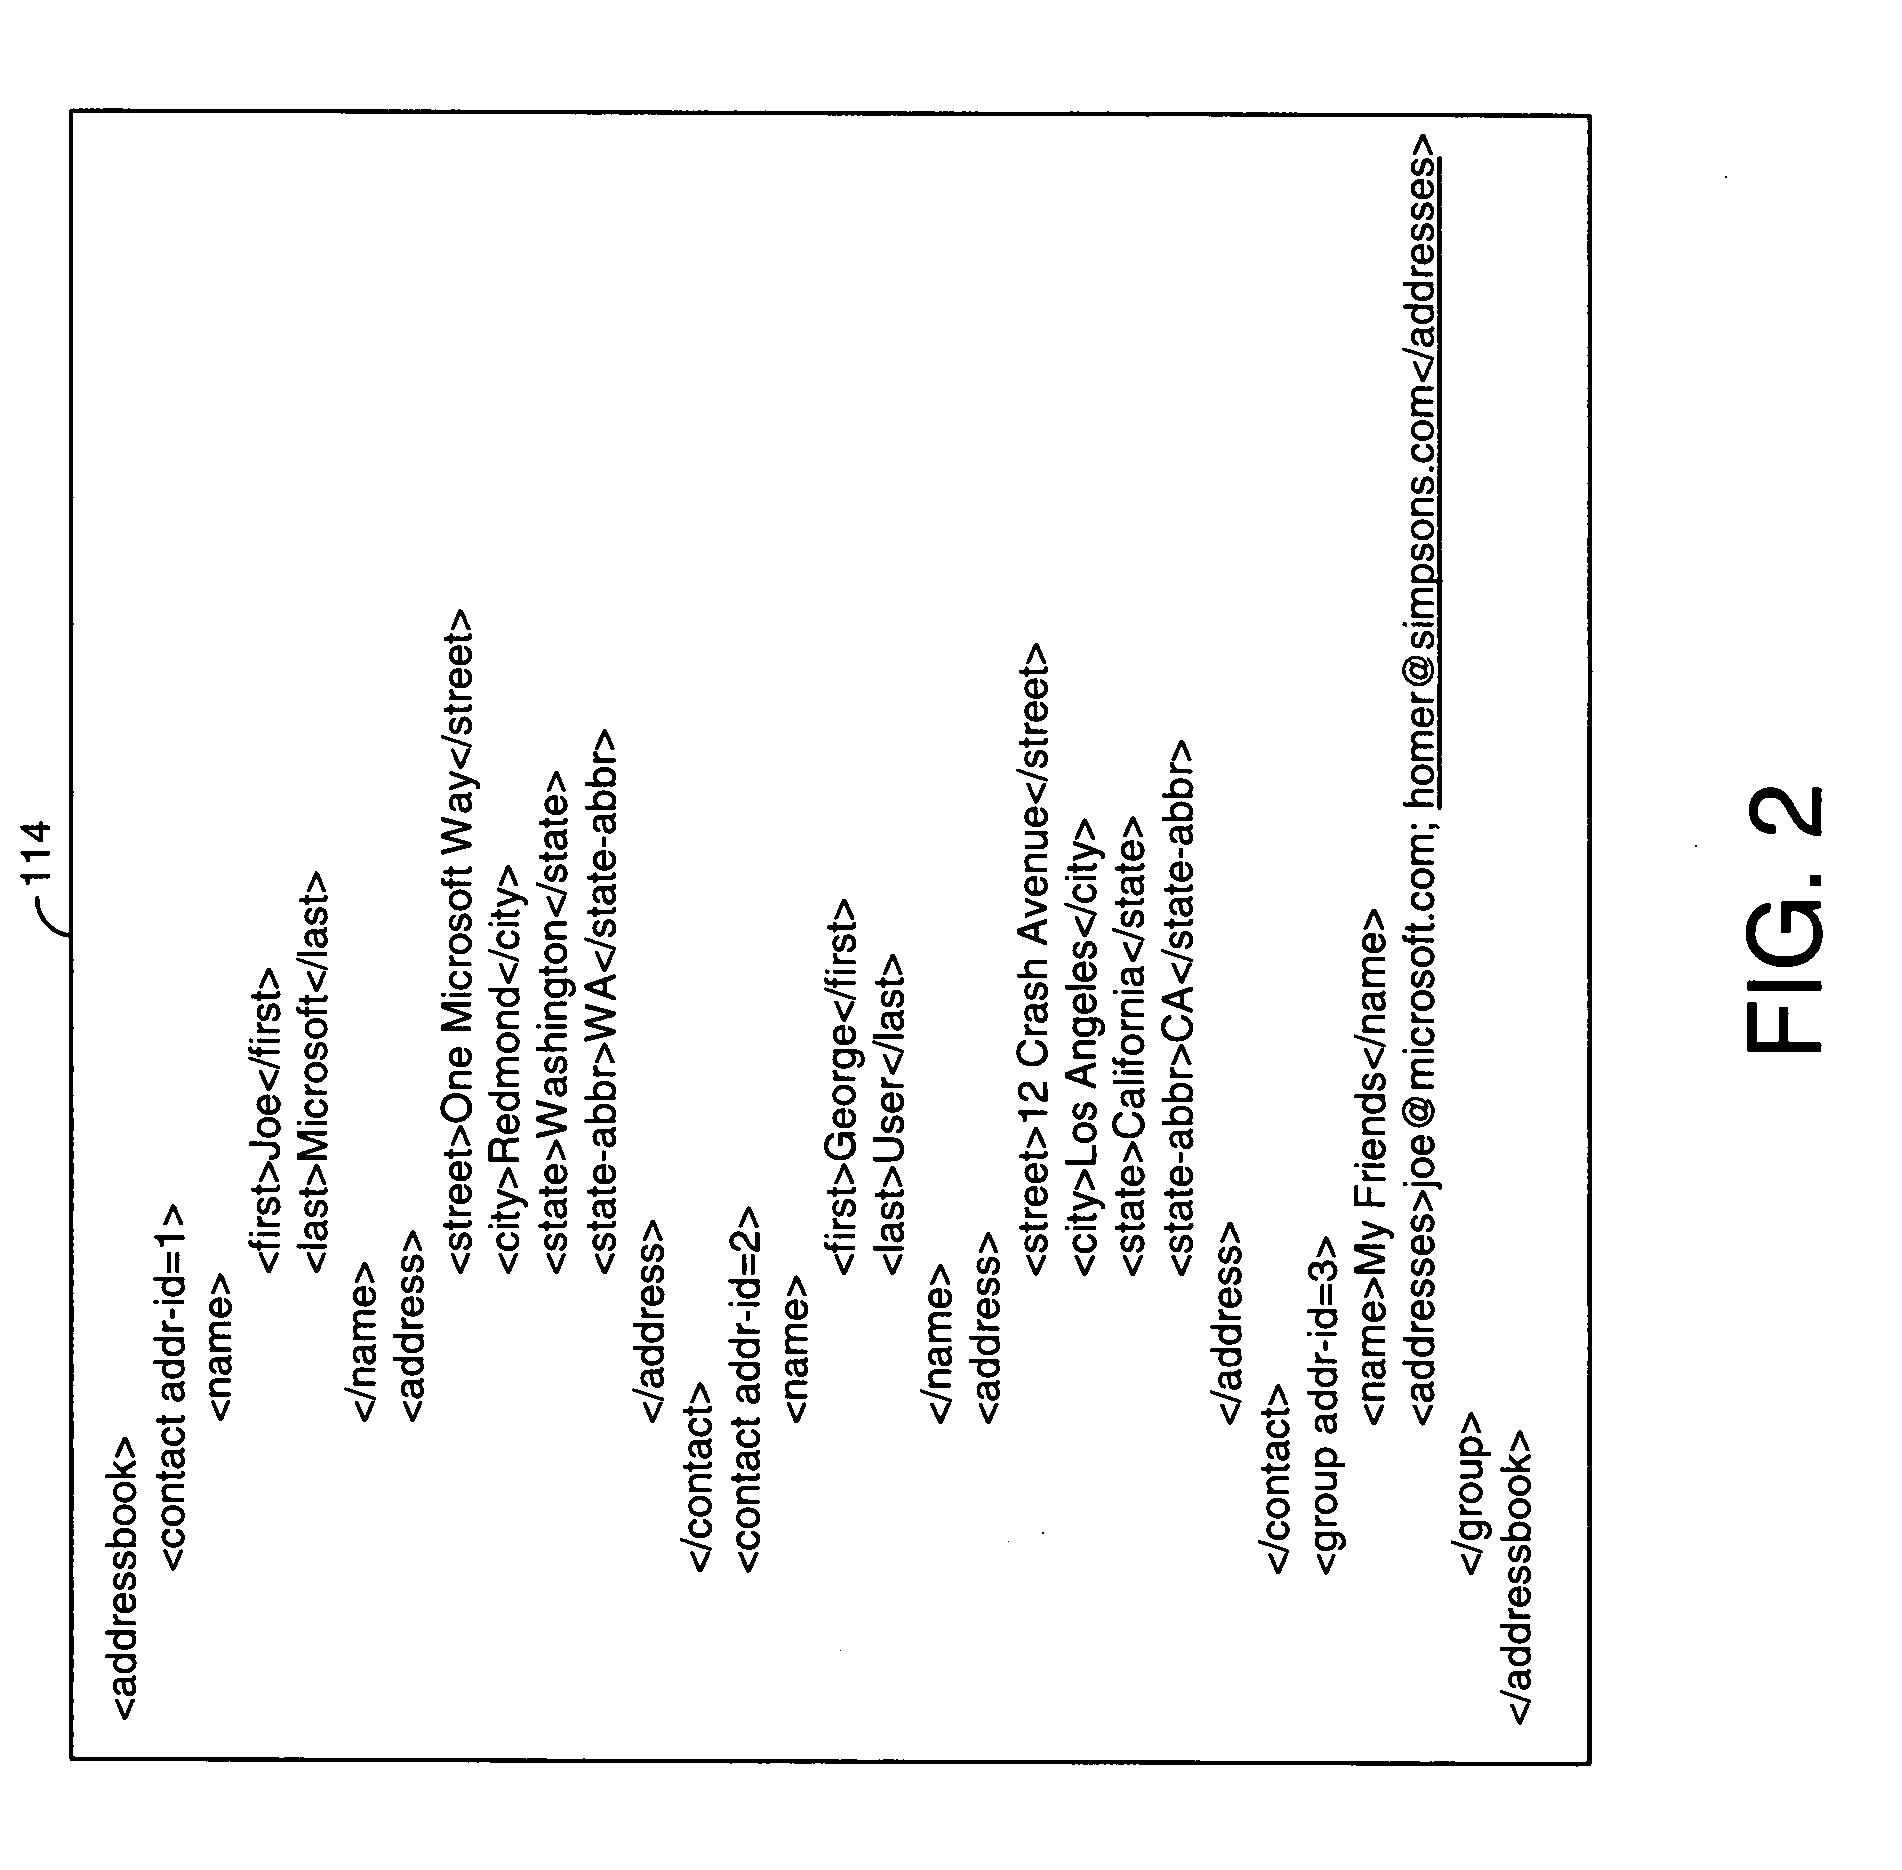 System and method for database having relational node structure